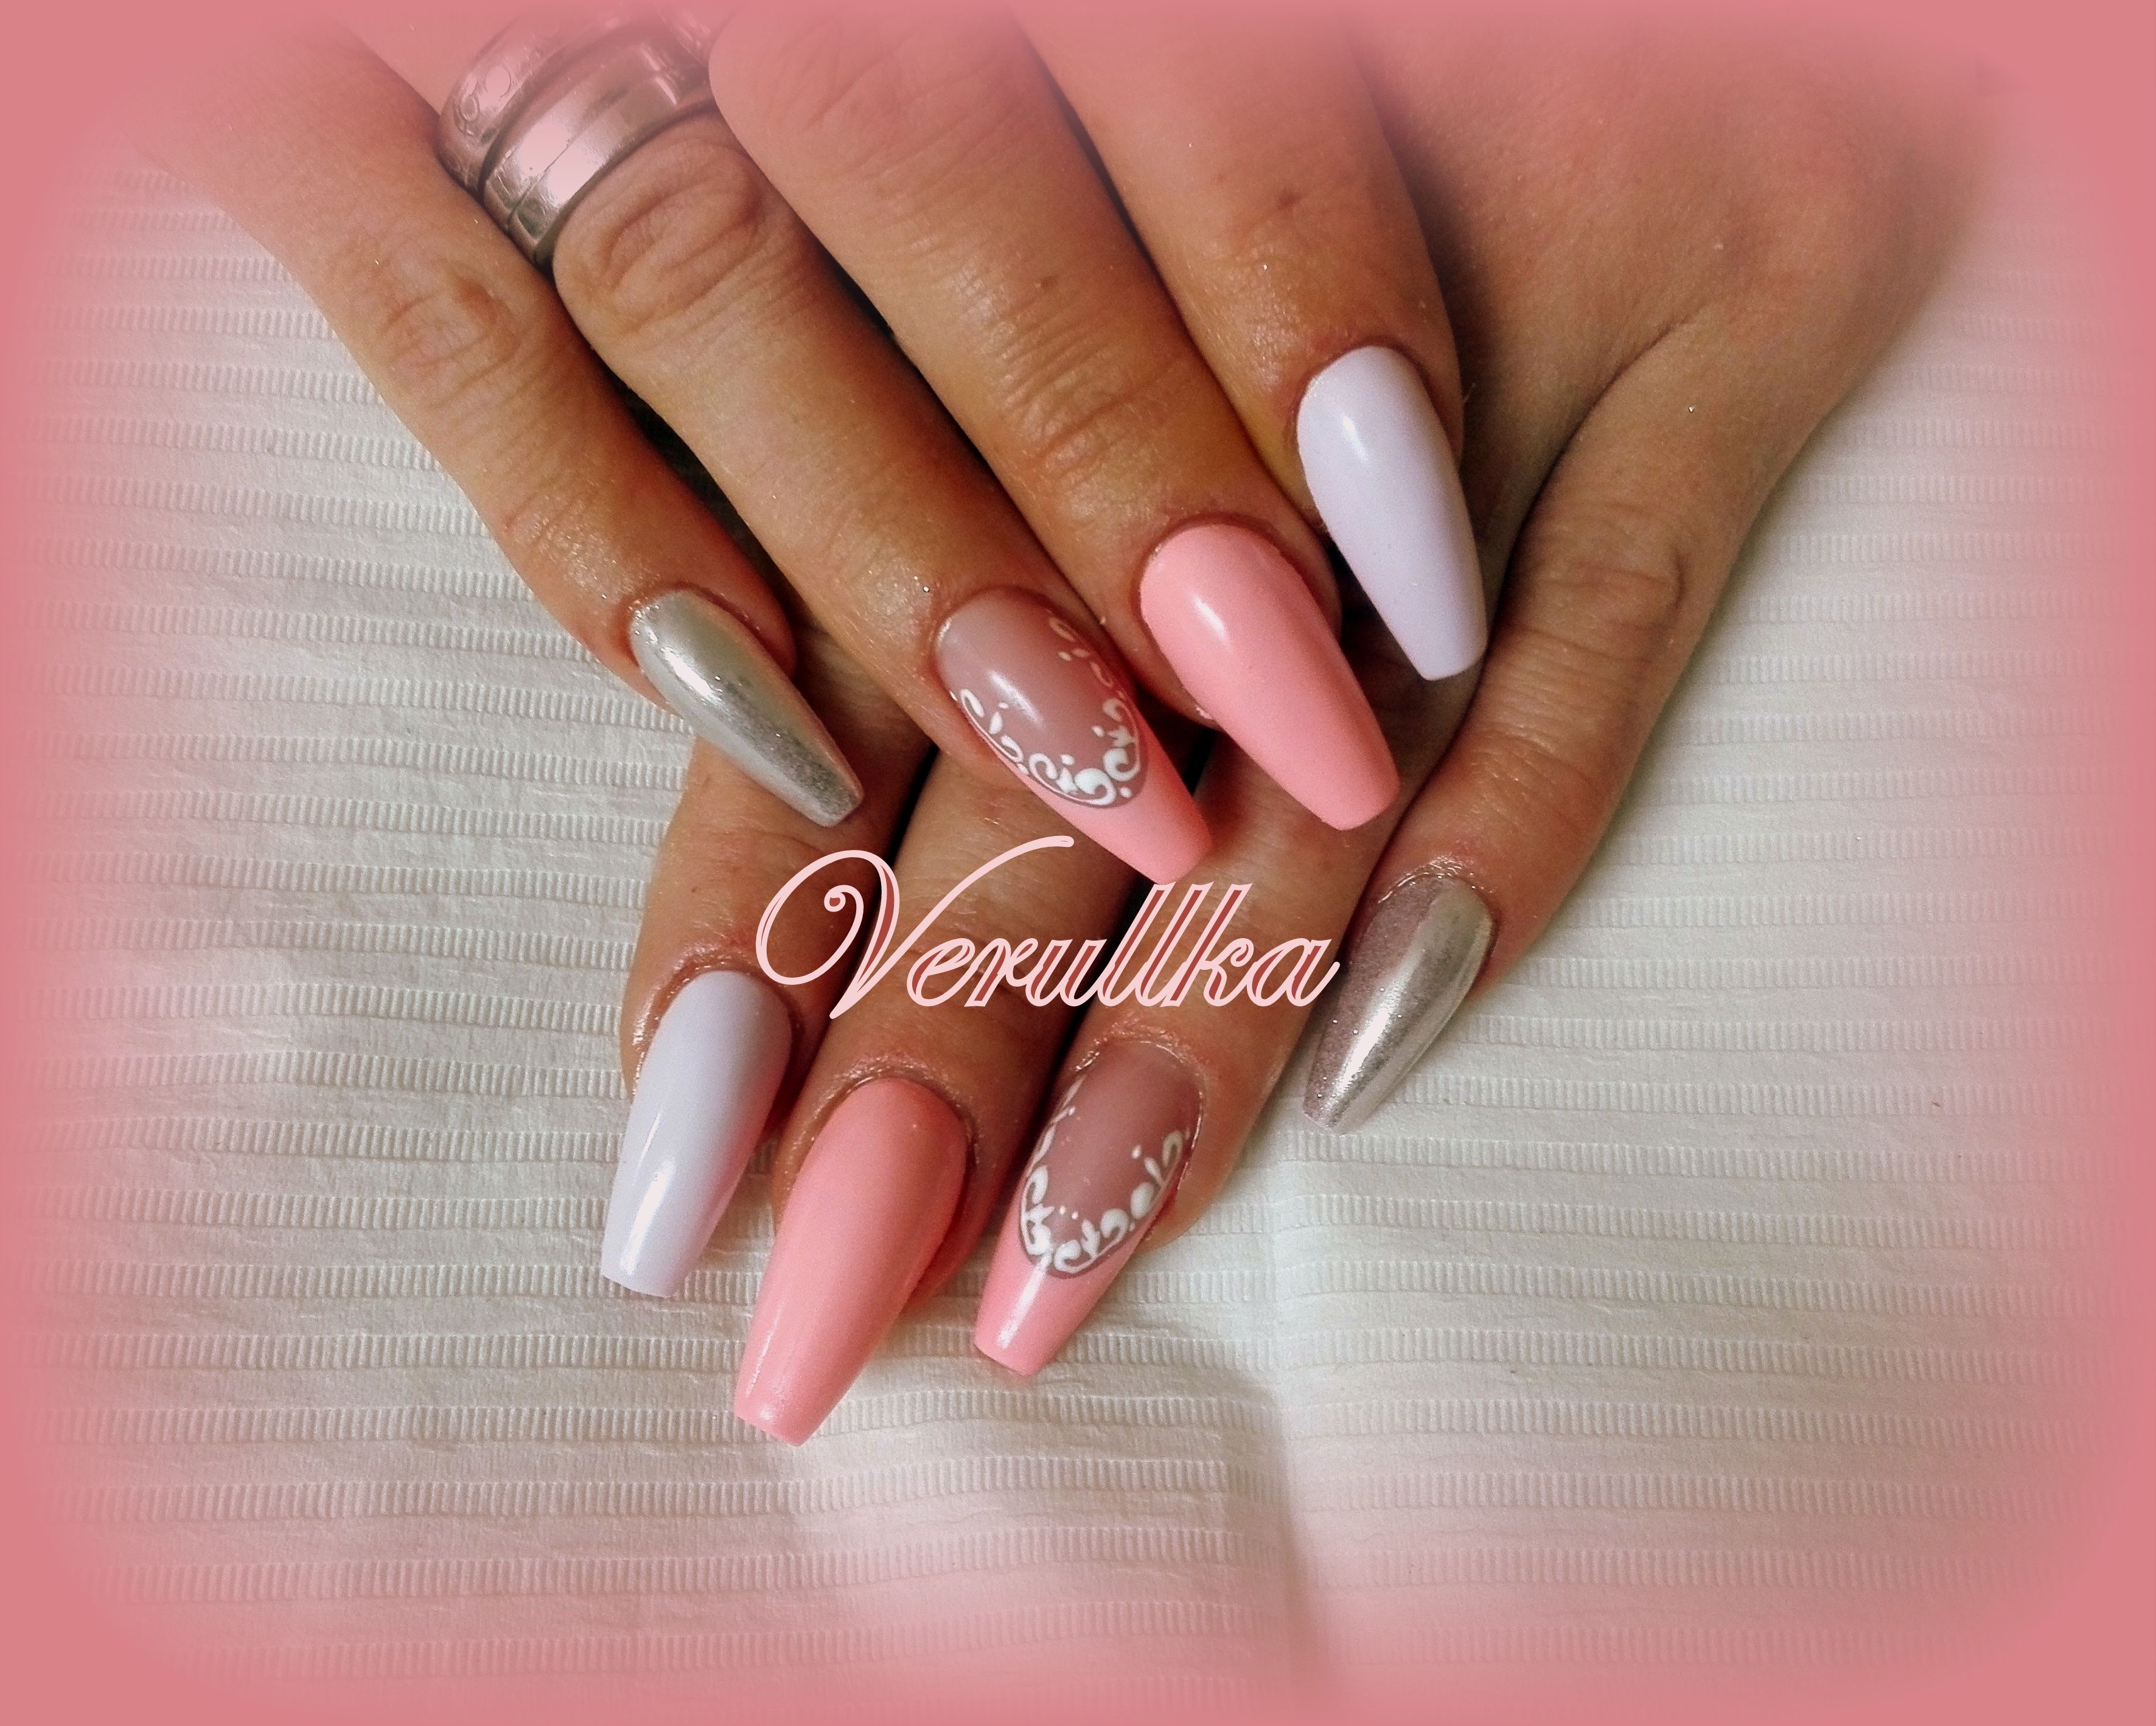 Peach Or Salmon Gel Nails With Decorated French Manicure